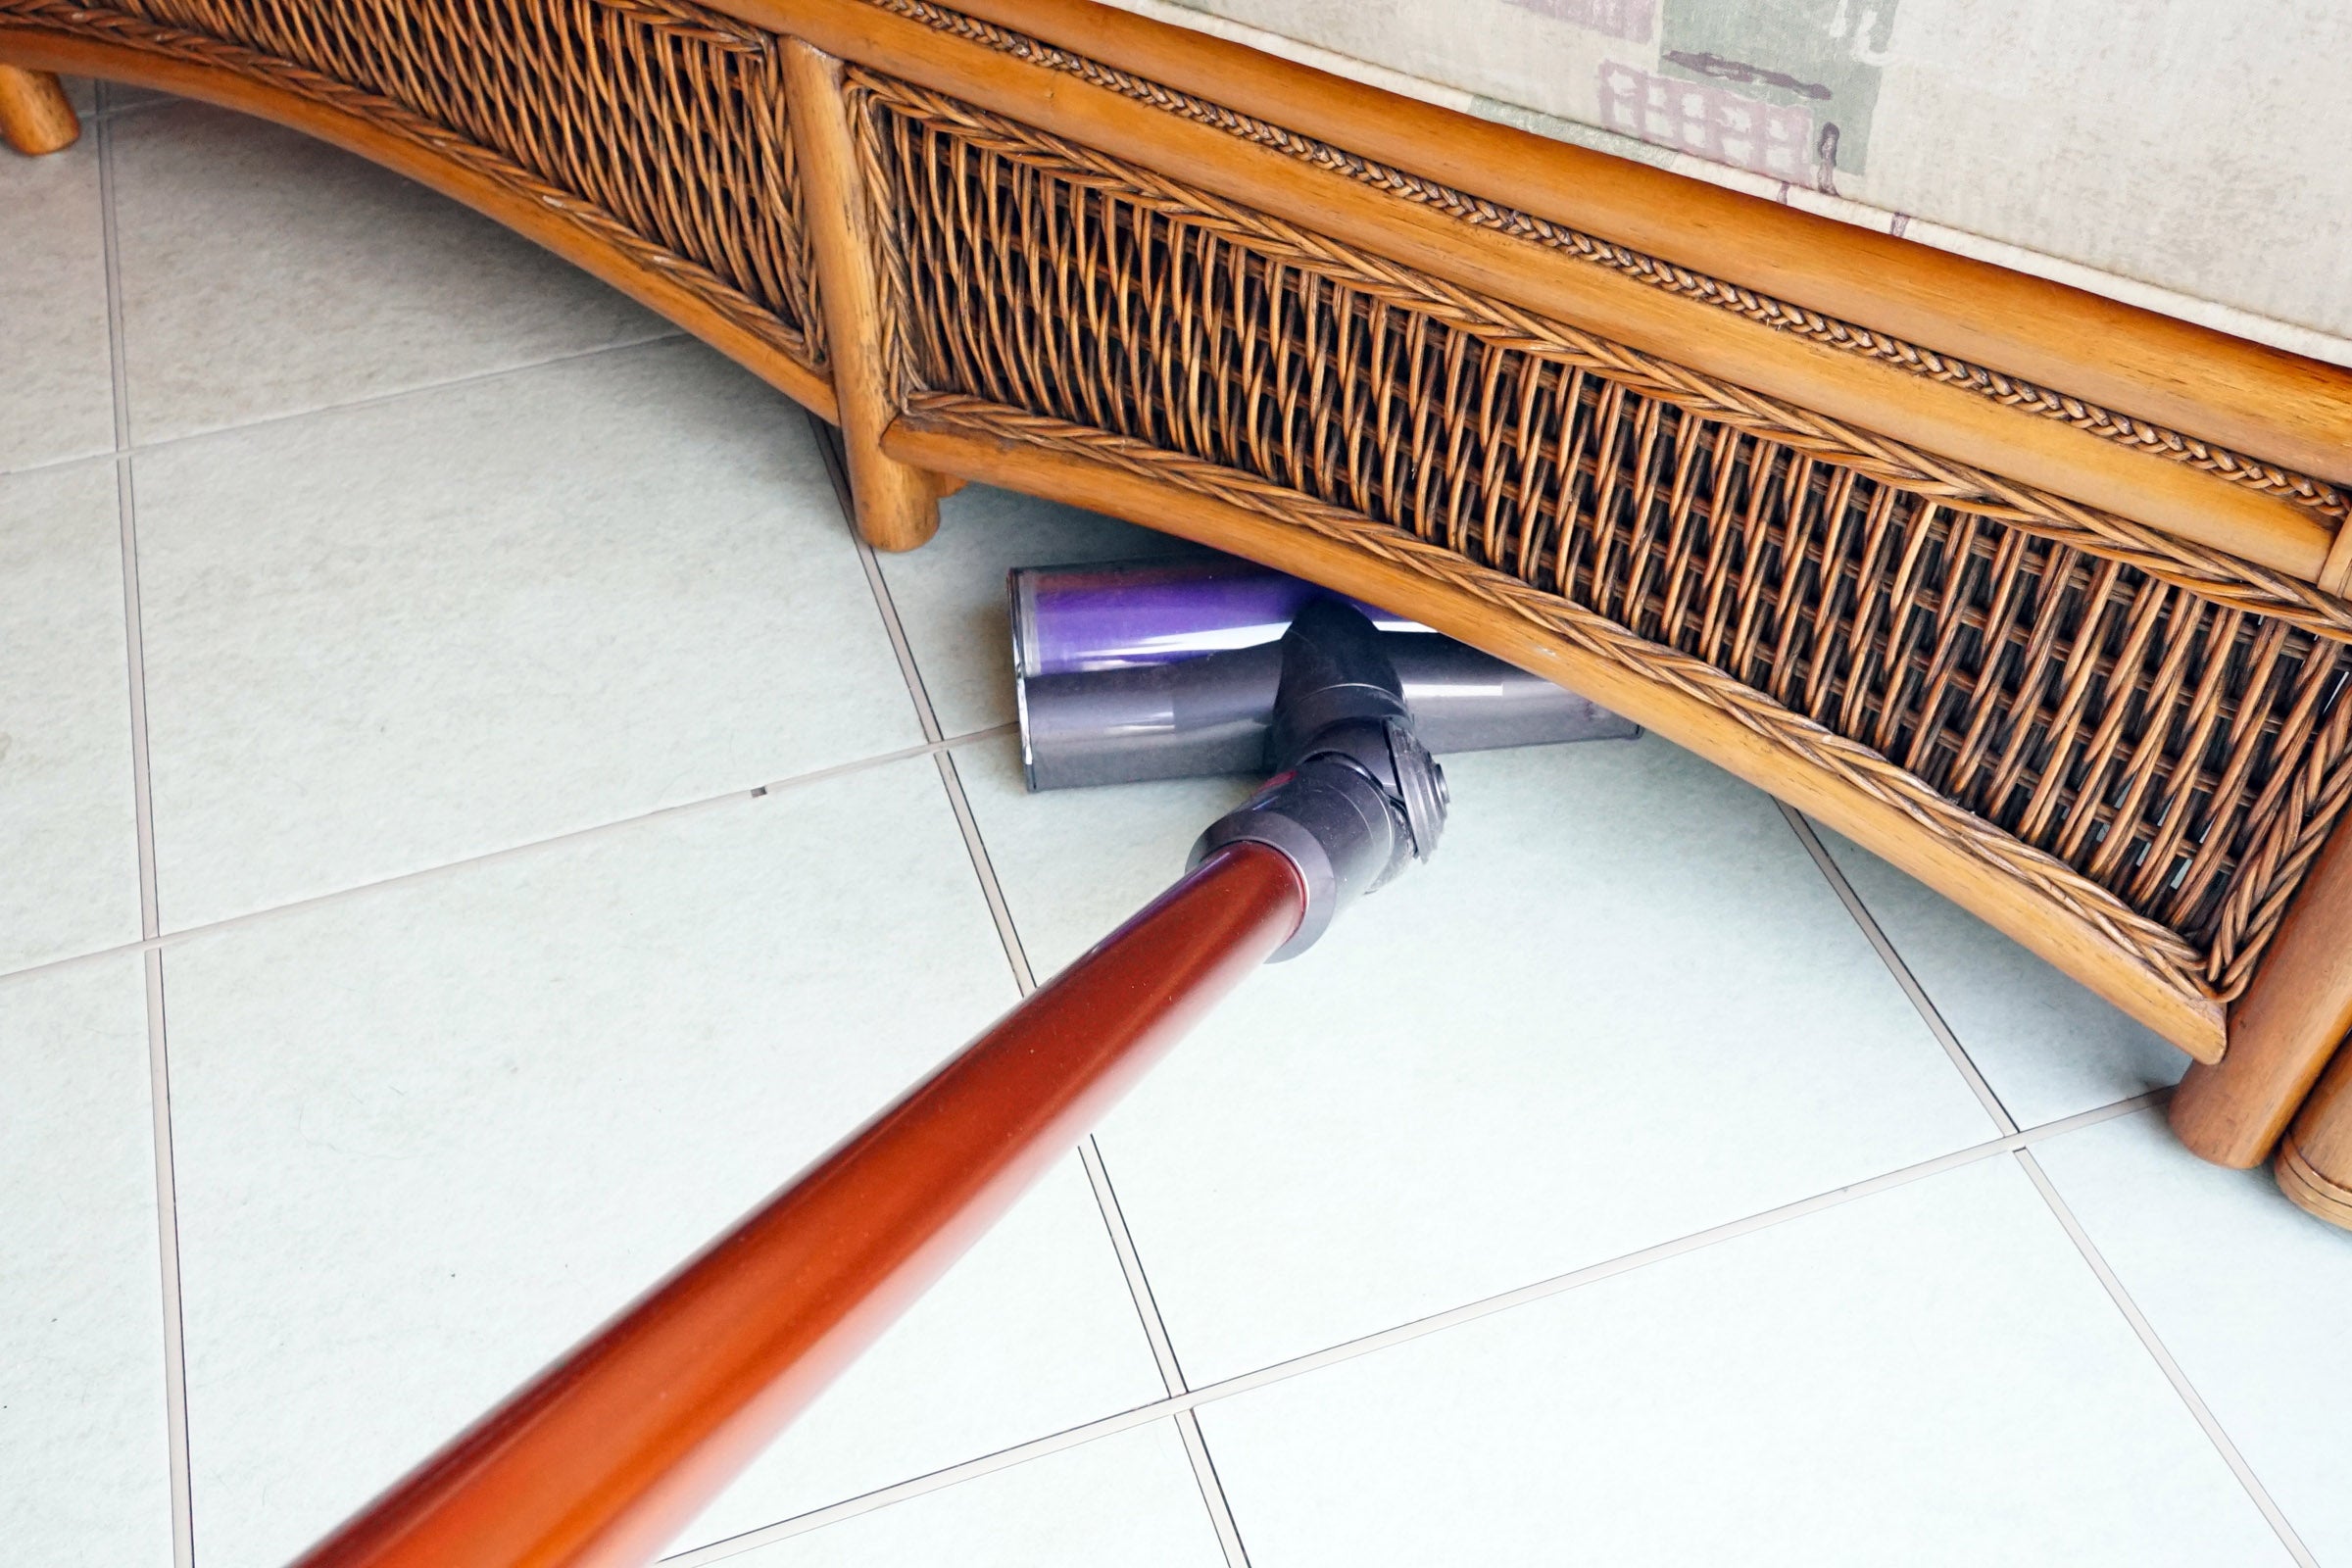 Dyson Cyclone V10 vacuum cleaning under a wicker couch.